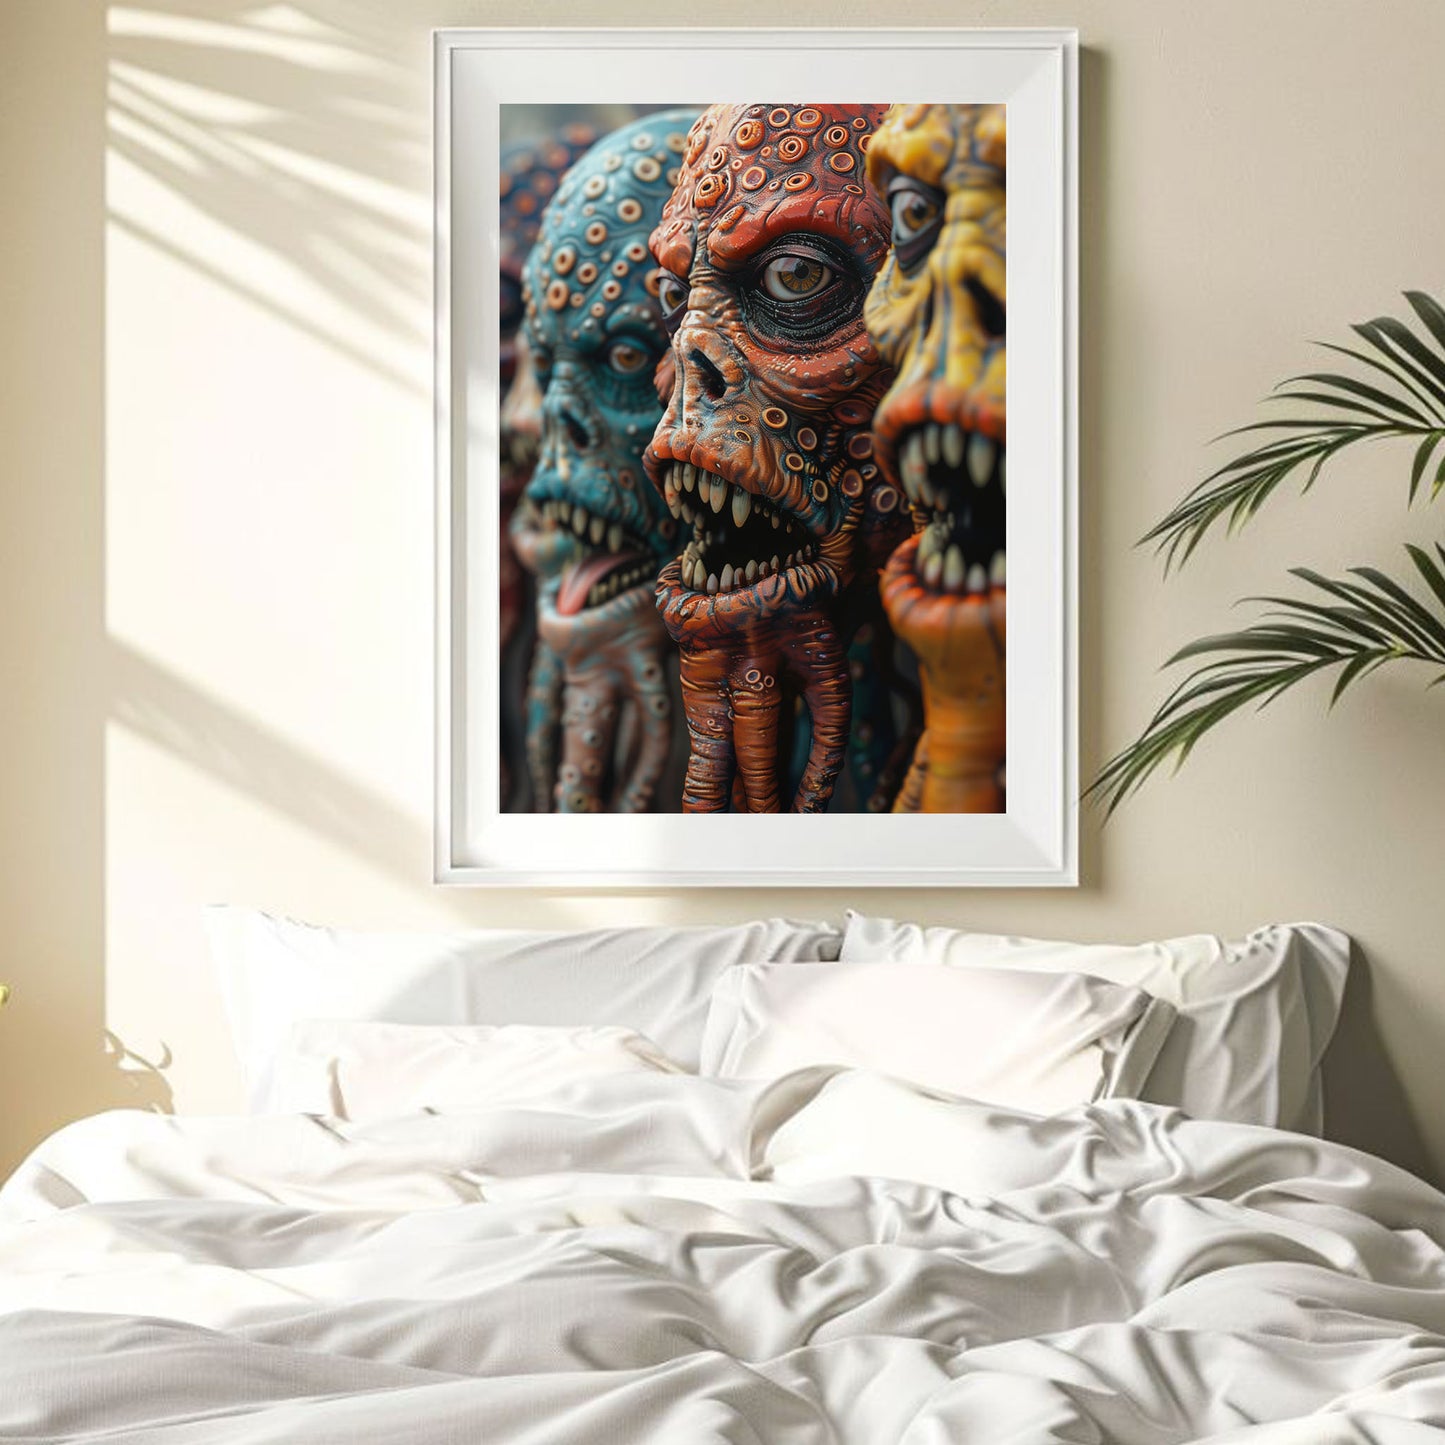 Creepy Wall Art Print featuring Colorful Monster Heads